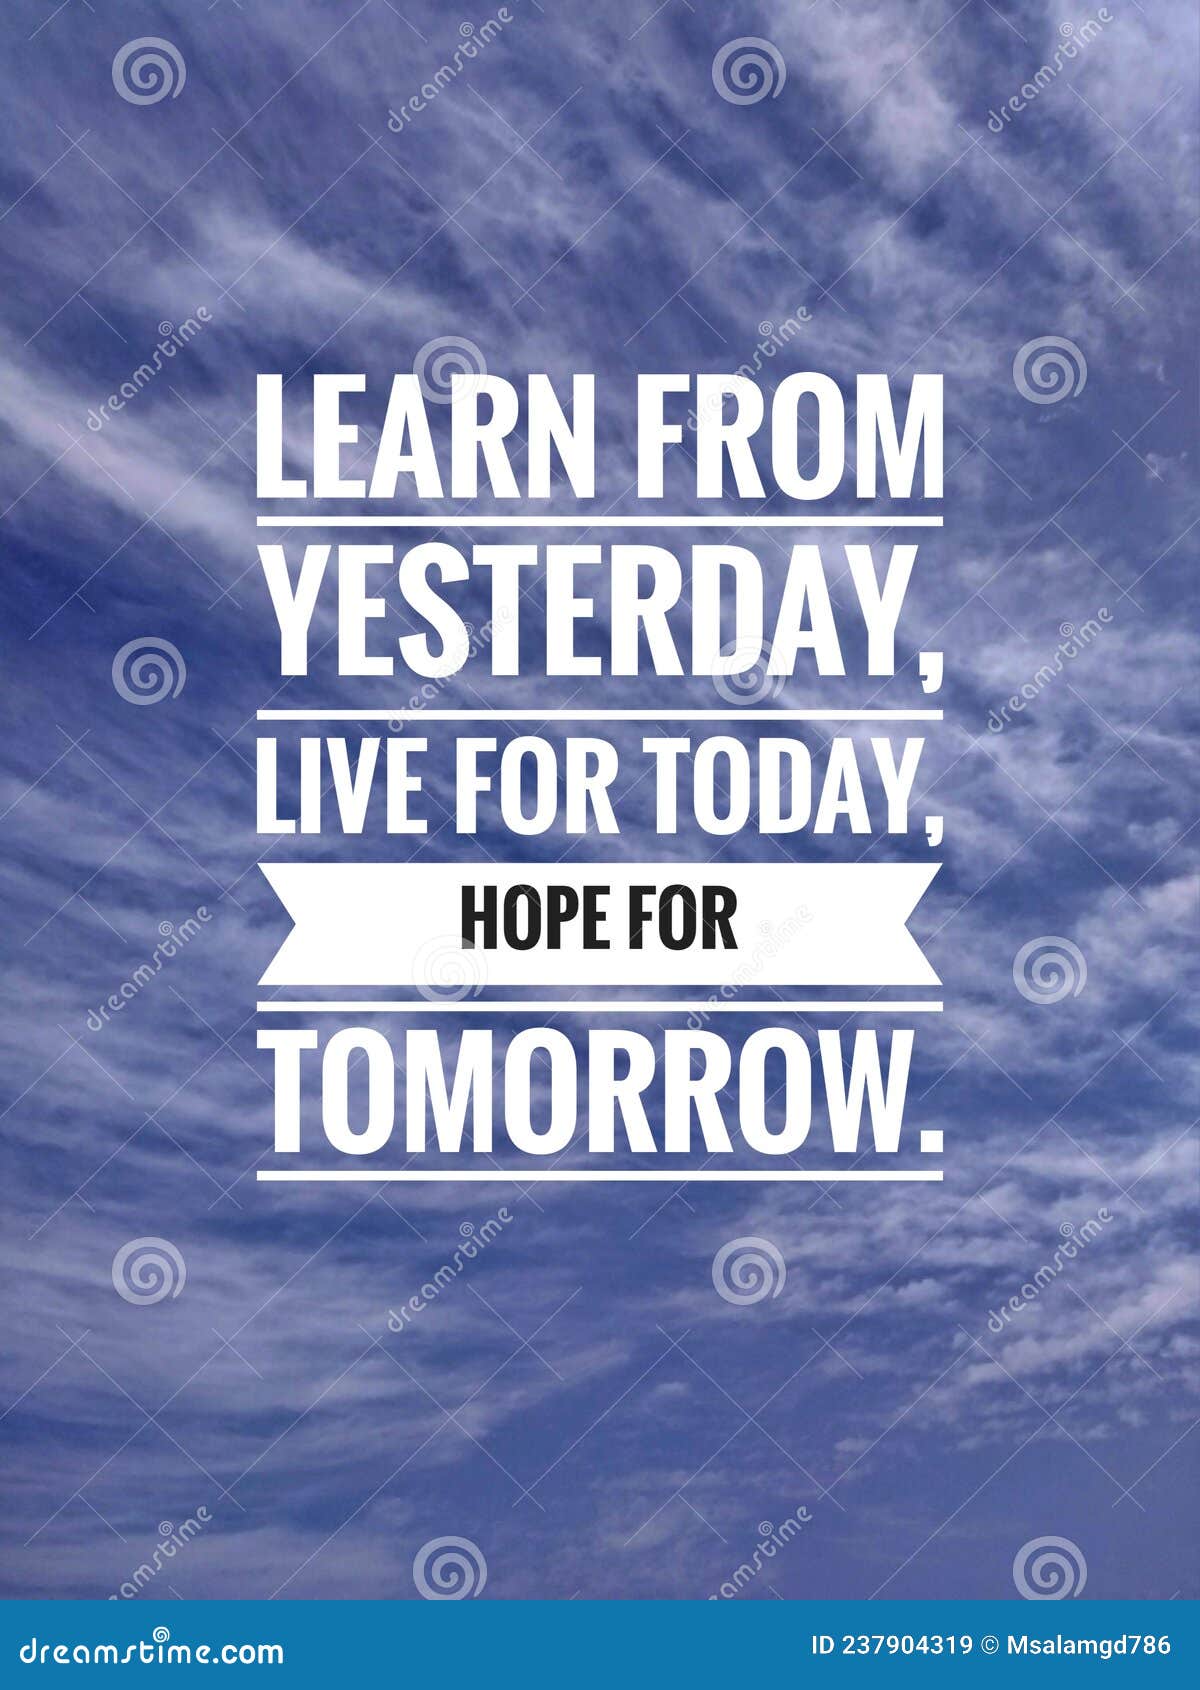 inspirational motivation quote on natue blue sky background. learn from yesterday, live for today, hope for tomorrow.